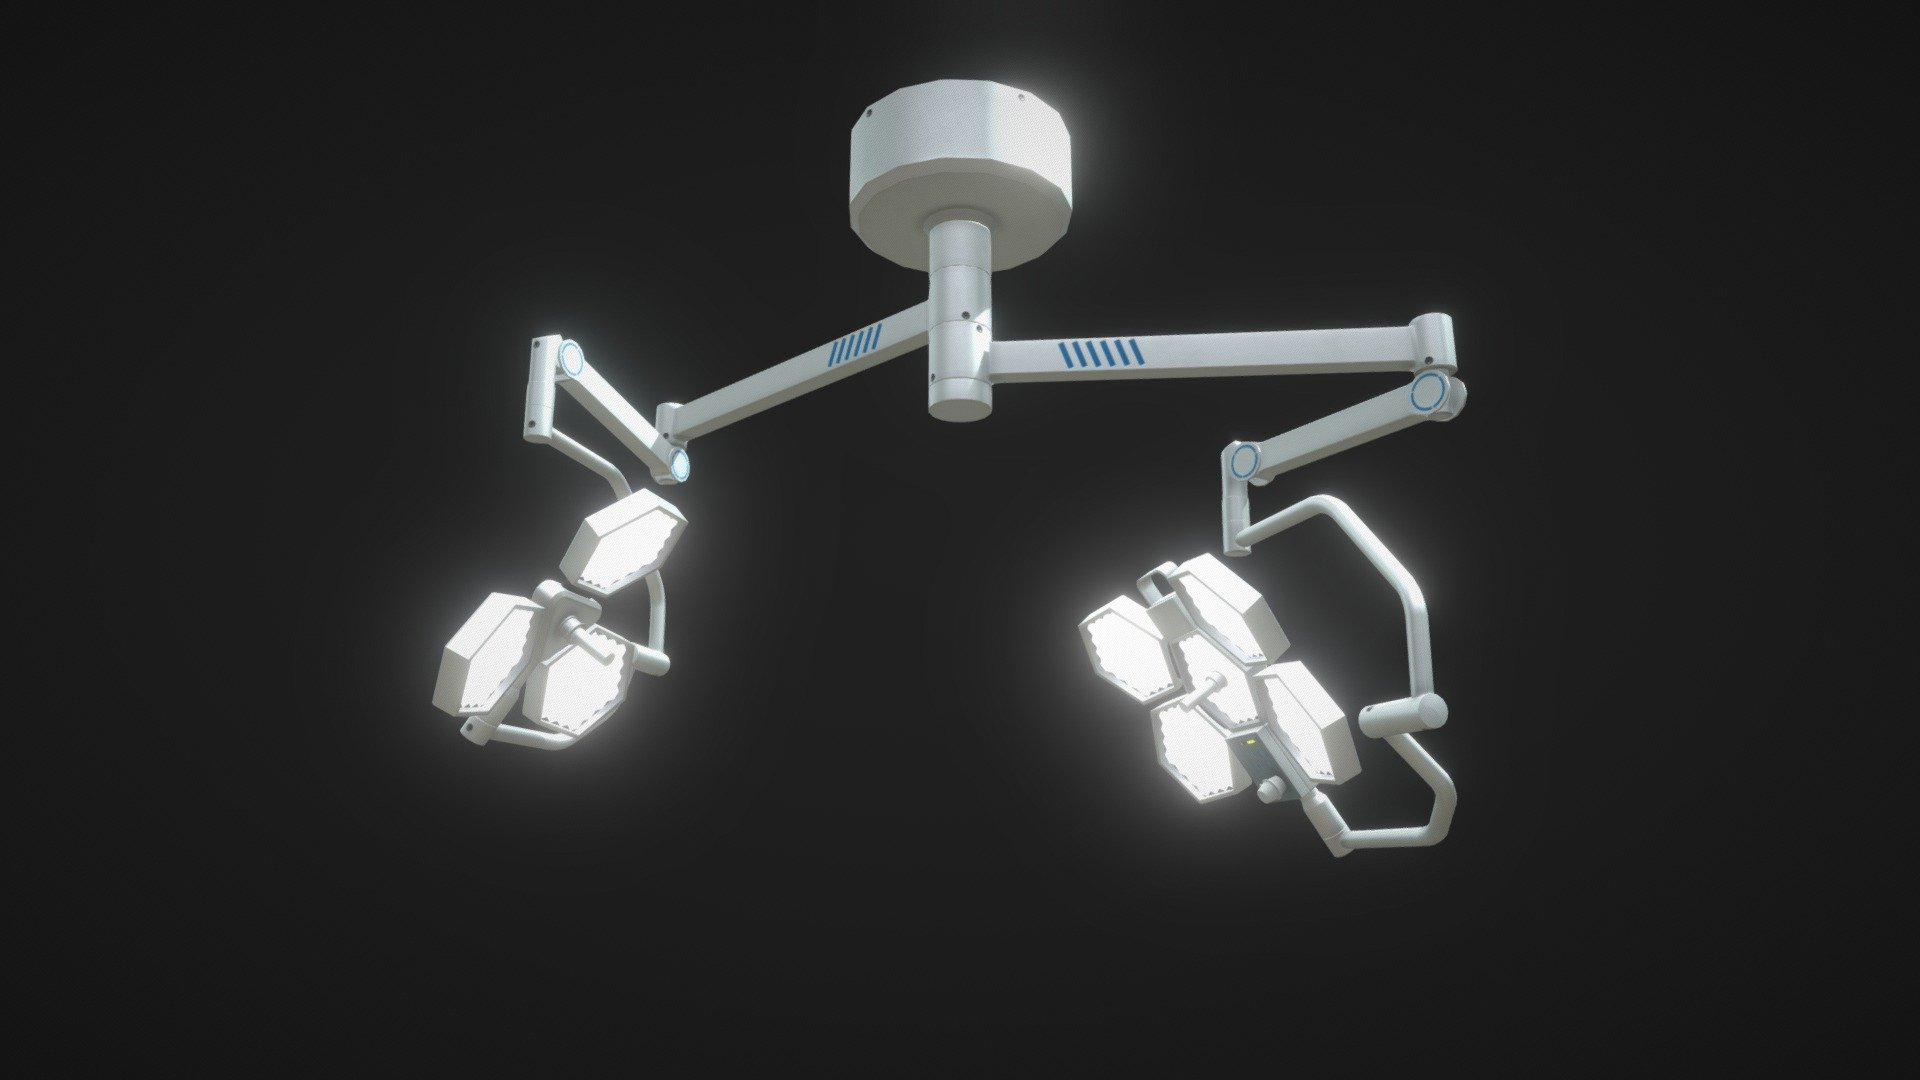 Low poly 3d model of Surgical lamp with Additiona textures for Unity MetalicSmoothnes Shader 3d model